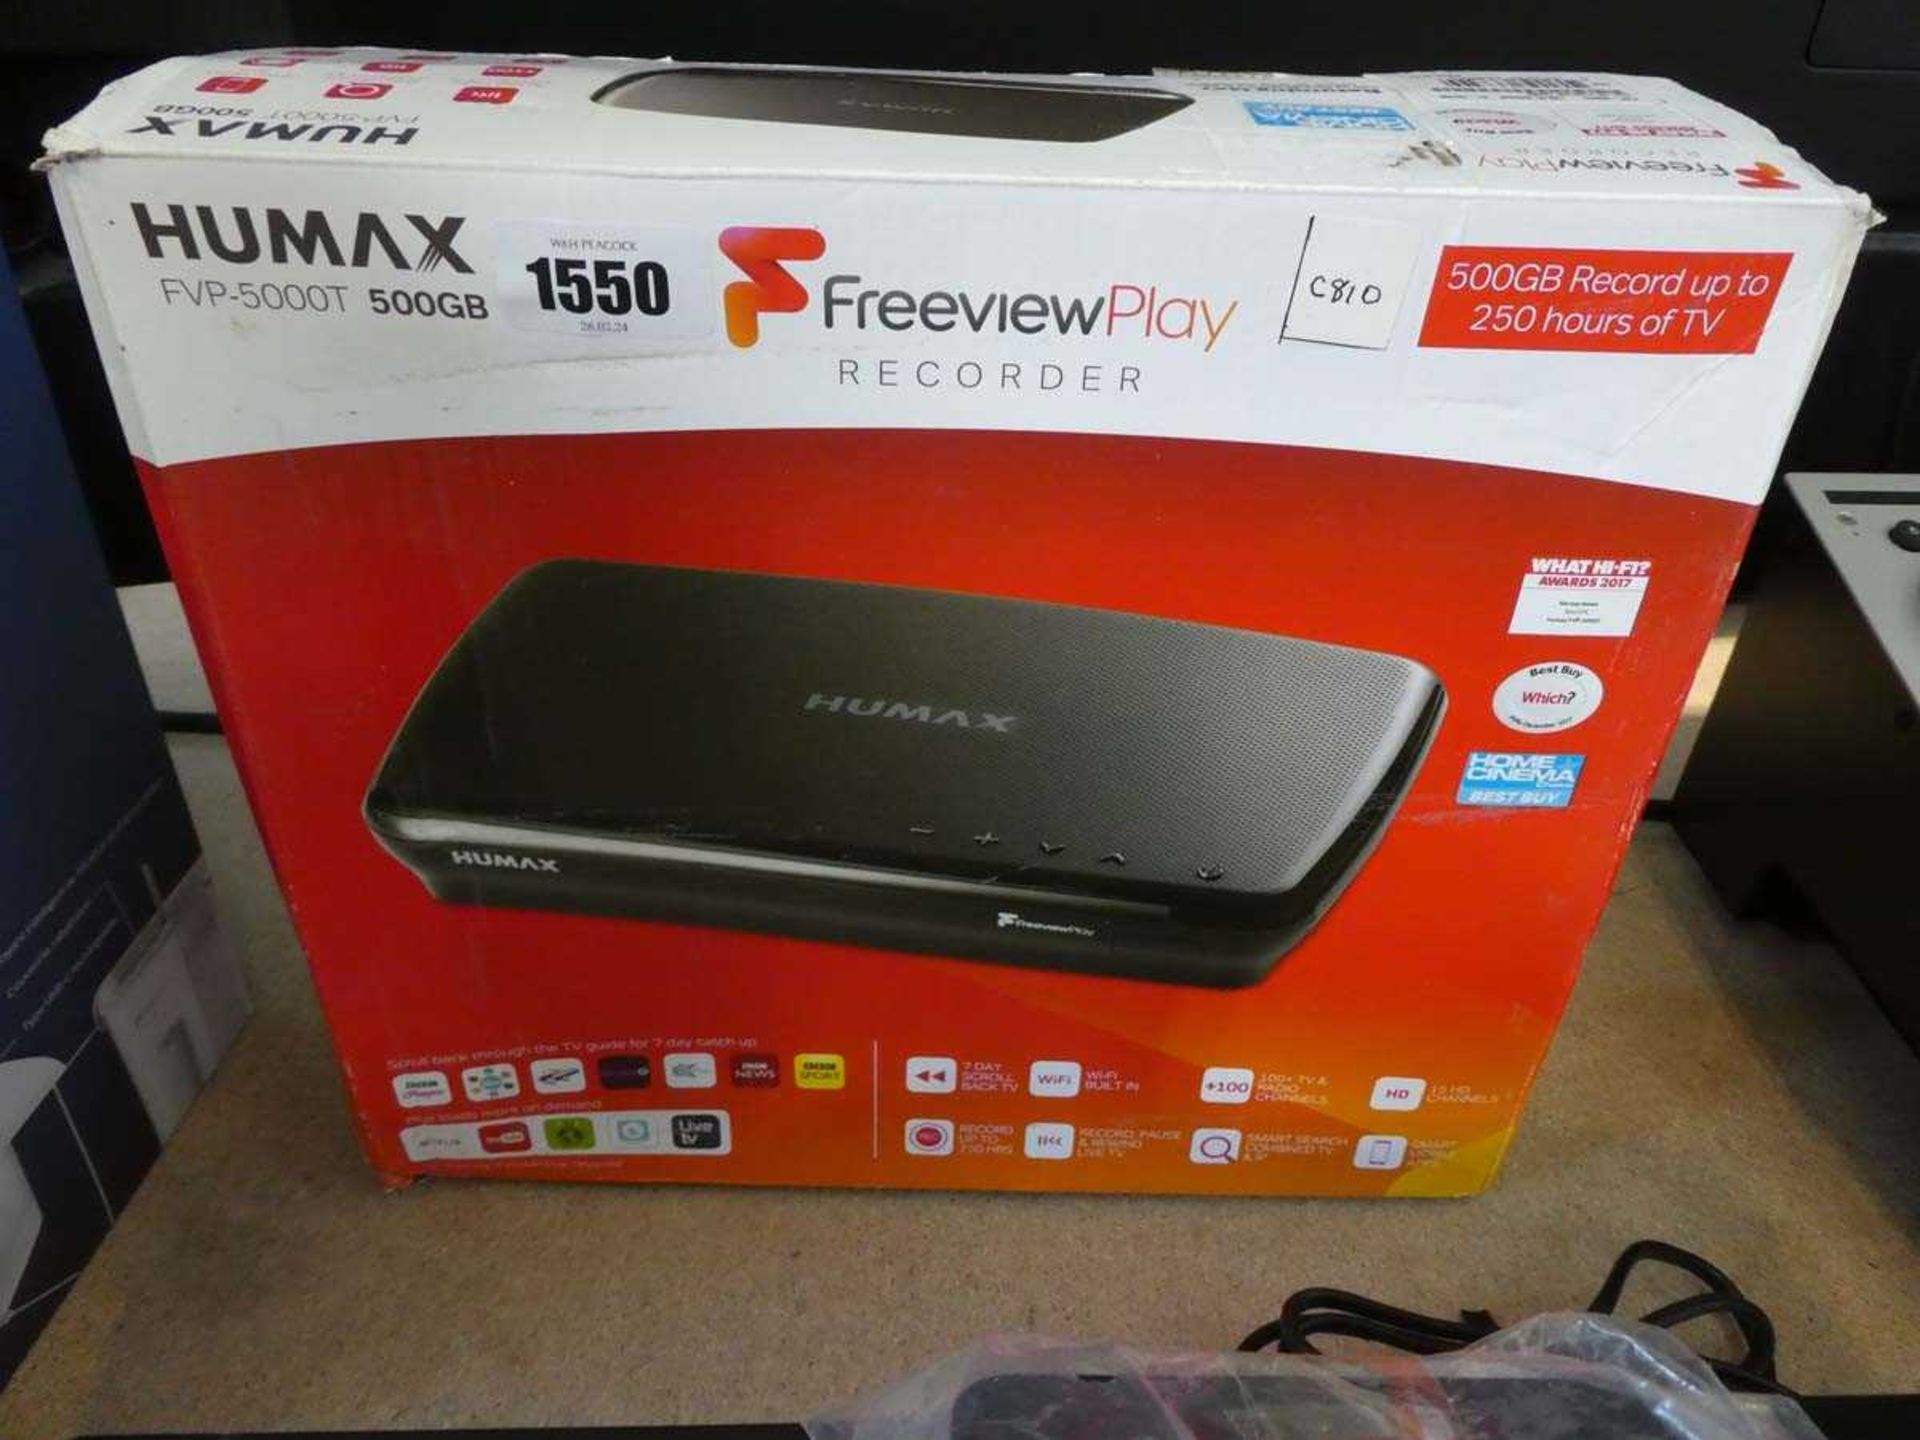 Humax FVP-5000T freeview play recorder